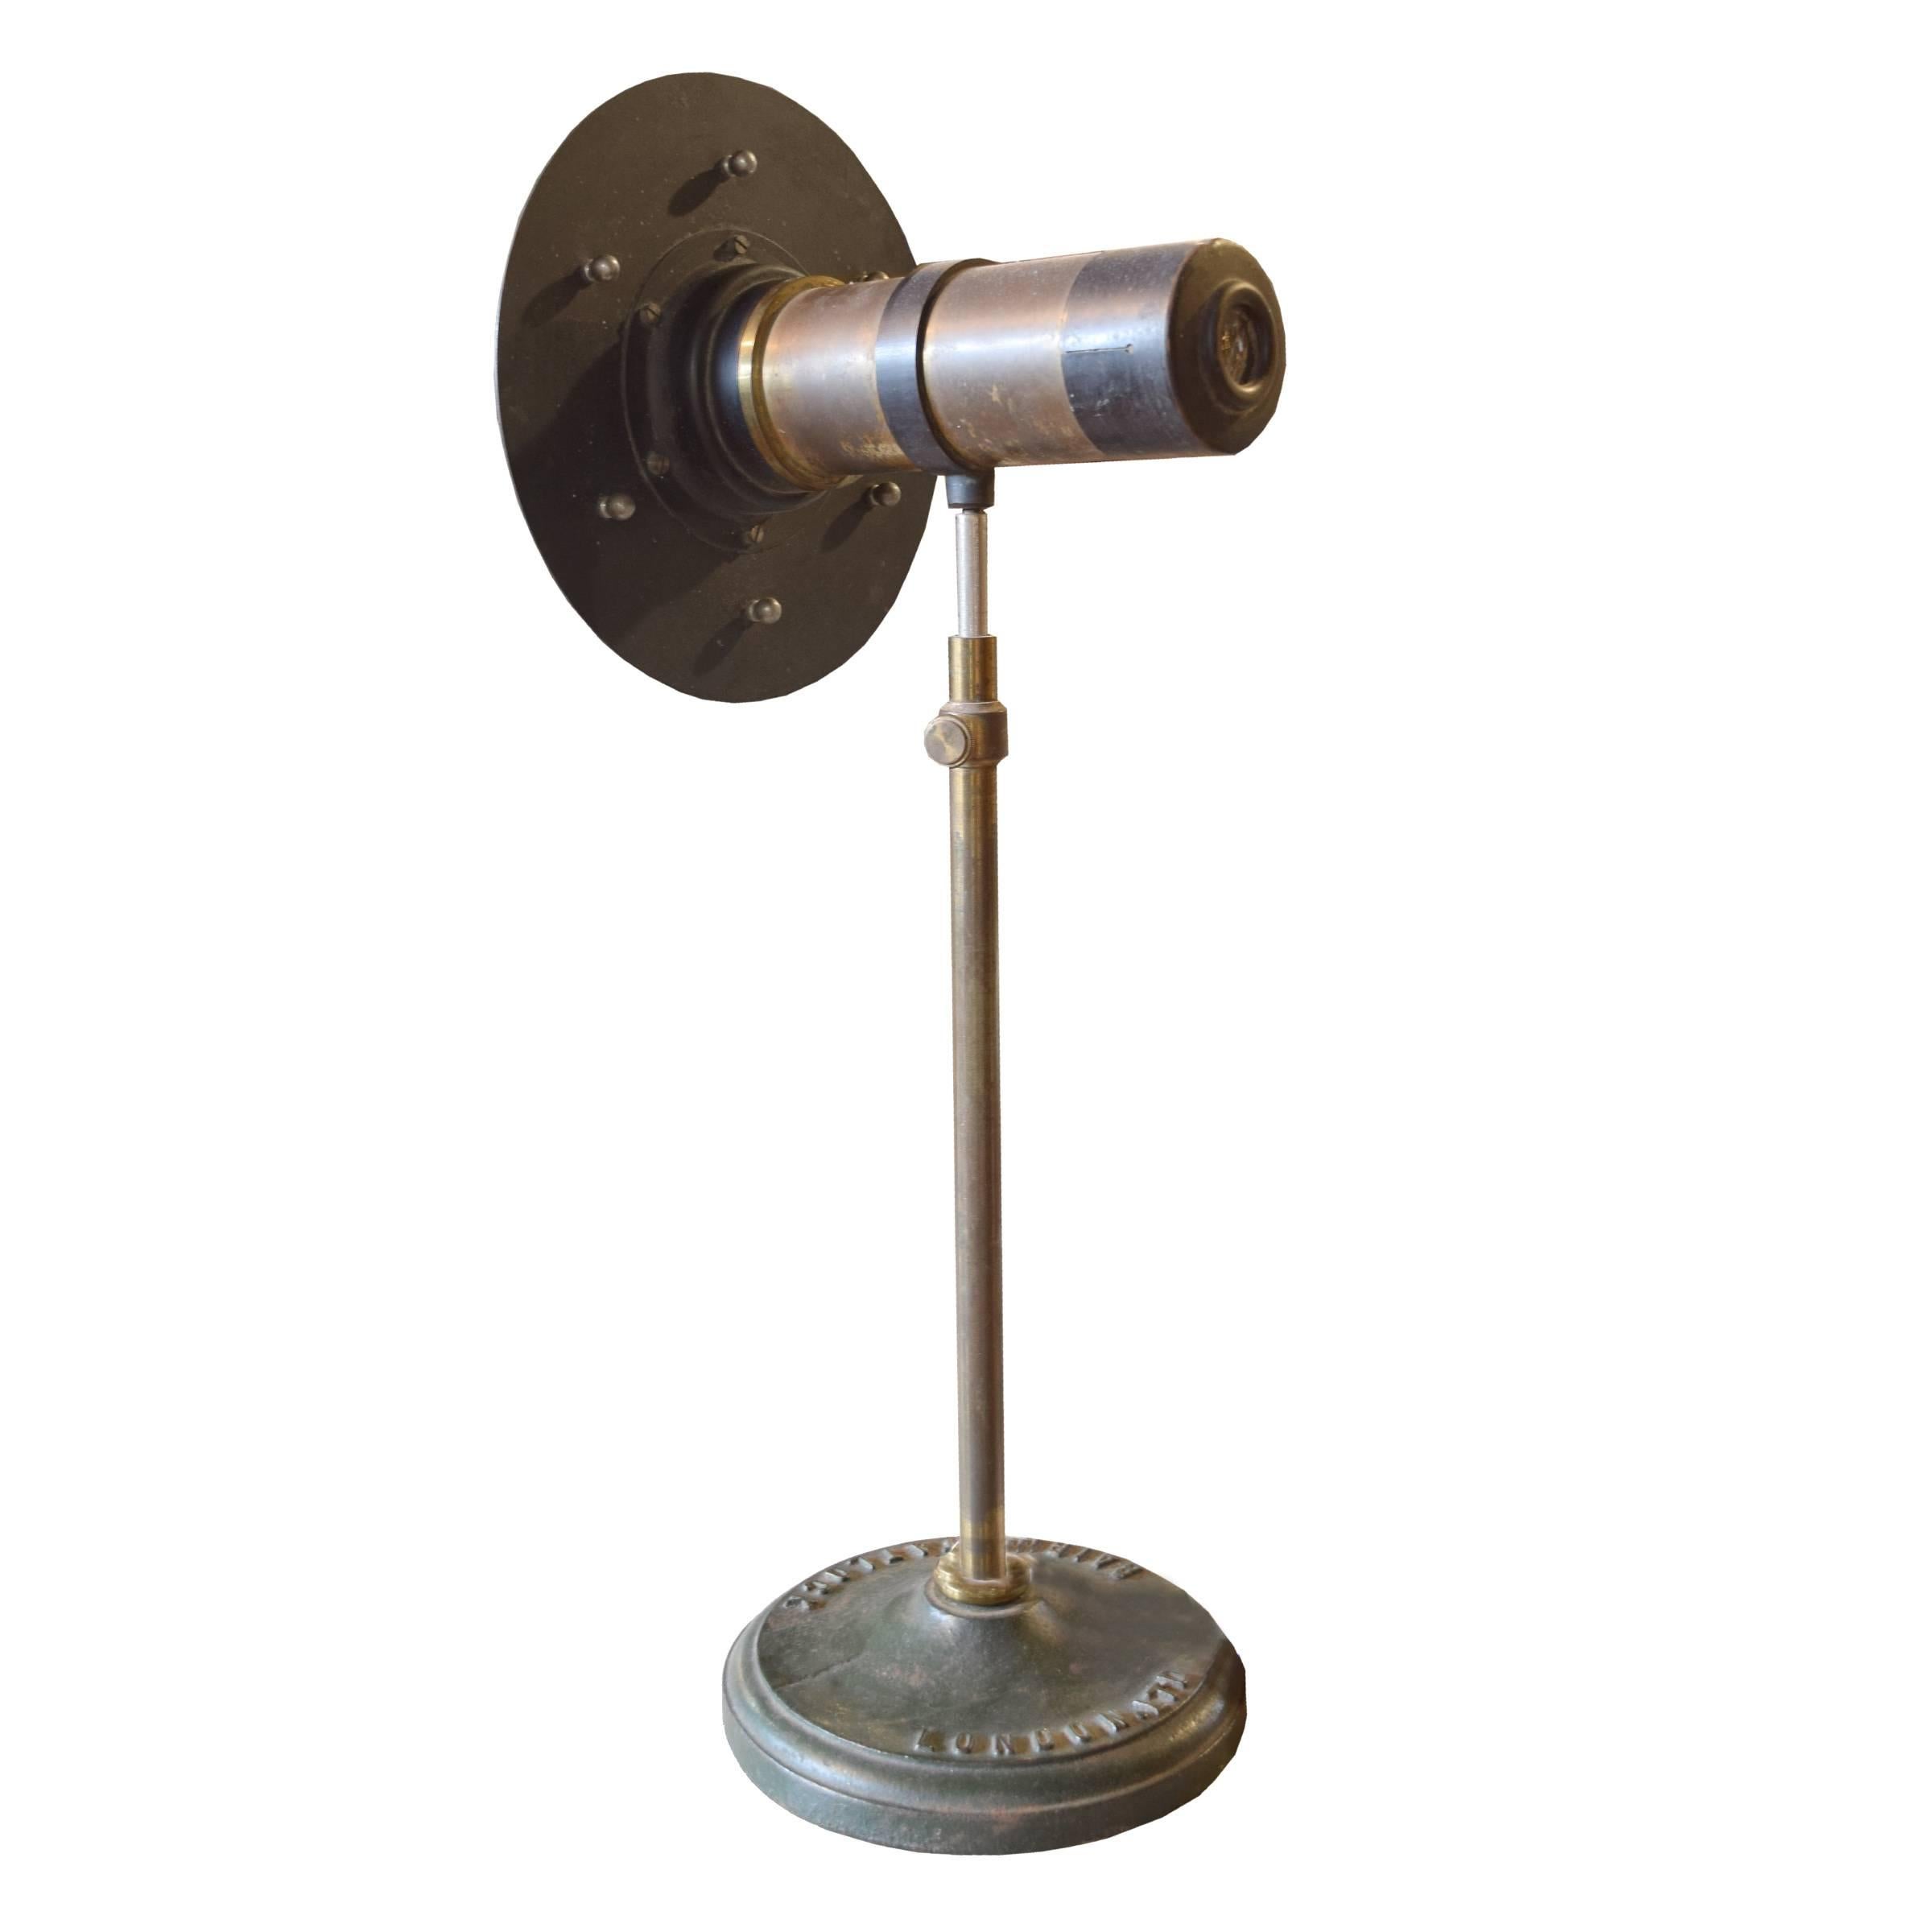 An extremely rare English Victorian kaleidoscope in working condition with a manually rotating front disc and telescoping Stand on a round base. Baird and Tatlock of London specialized in laboratory and scientific instruments starting in the late